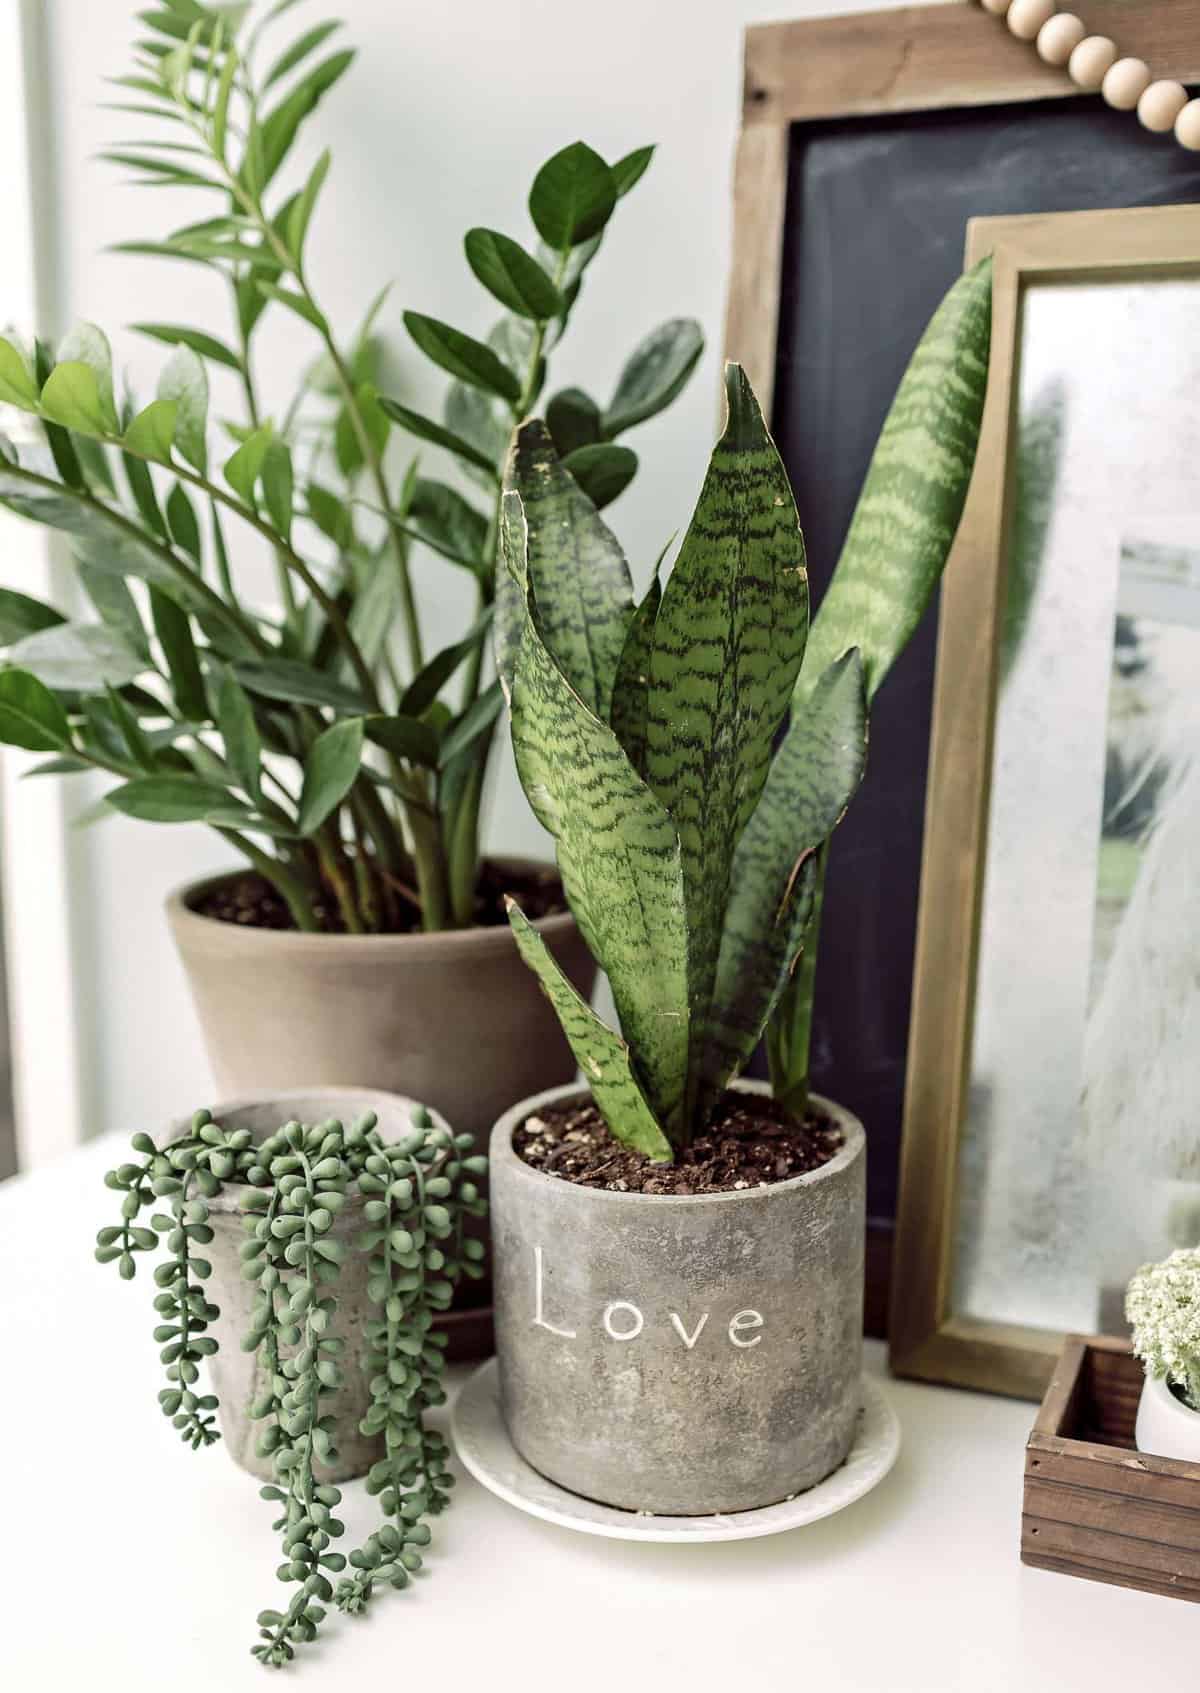 Do you struggle to keep your indoor plants alive? I've got 6 indoor plants made for those of us with a black thumb. Let's talk about some unkillable plants.